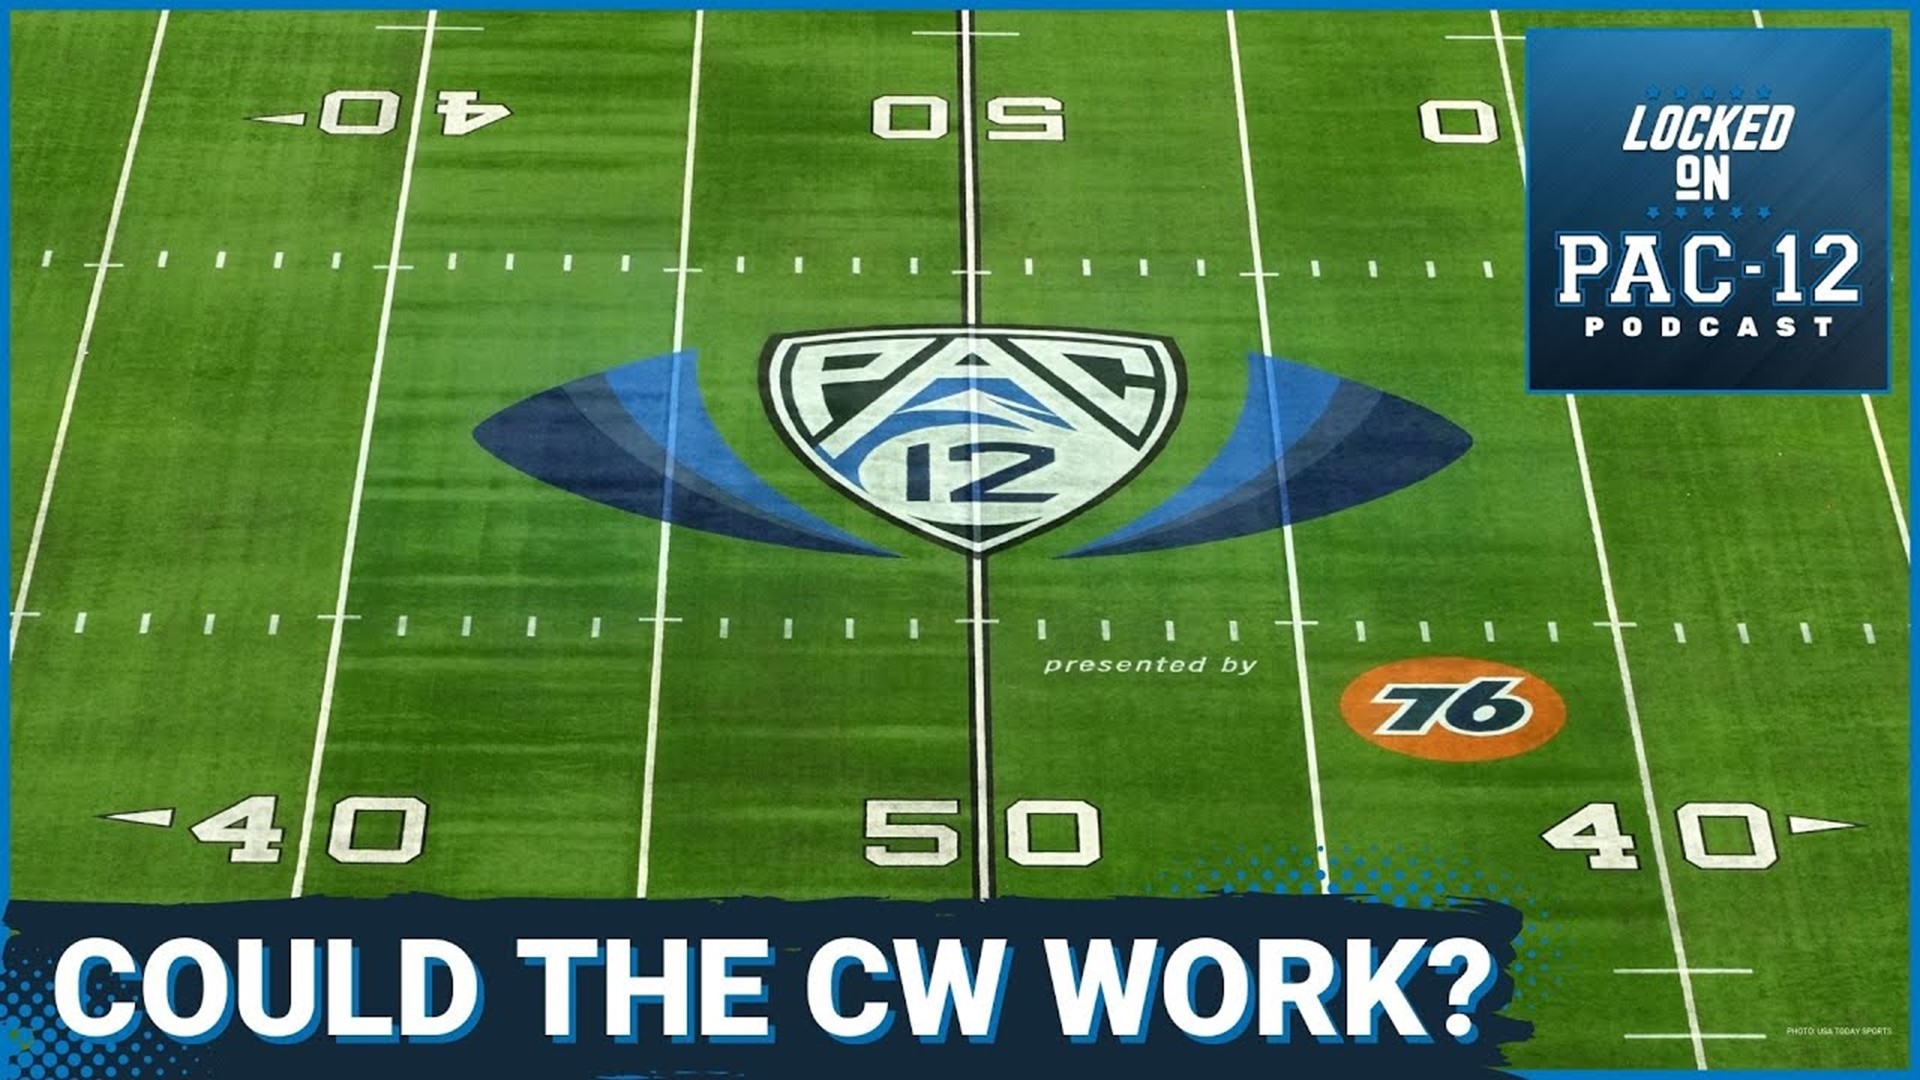 Is The CW an option for the Pac-12s new media rights deal? newswest9